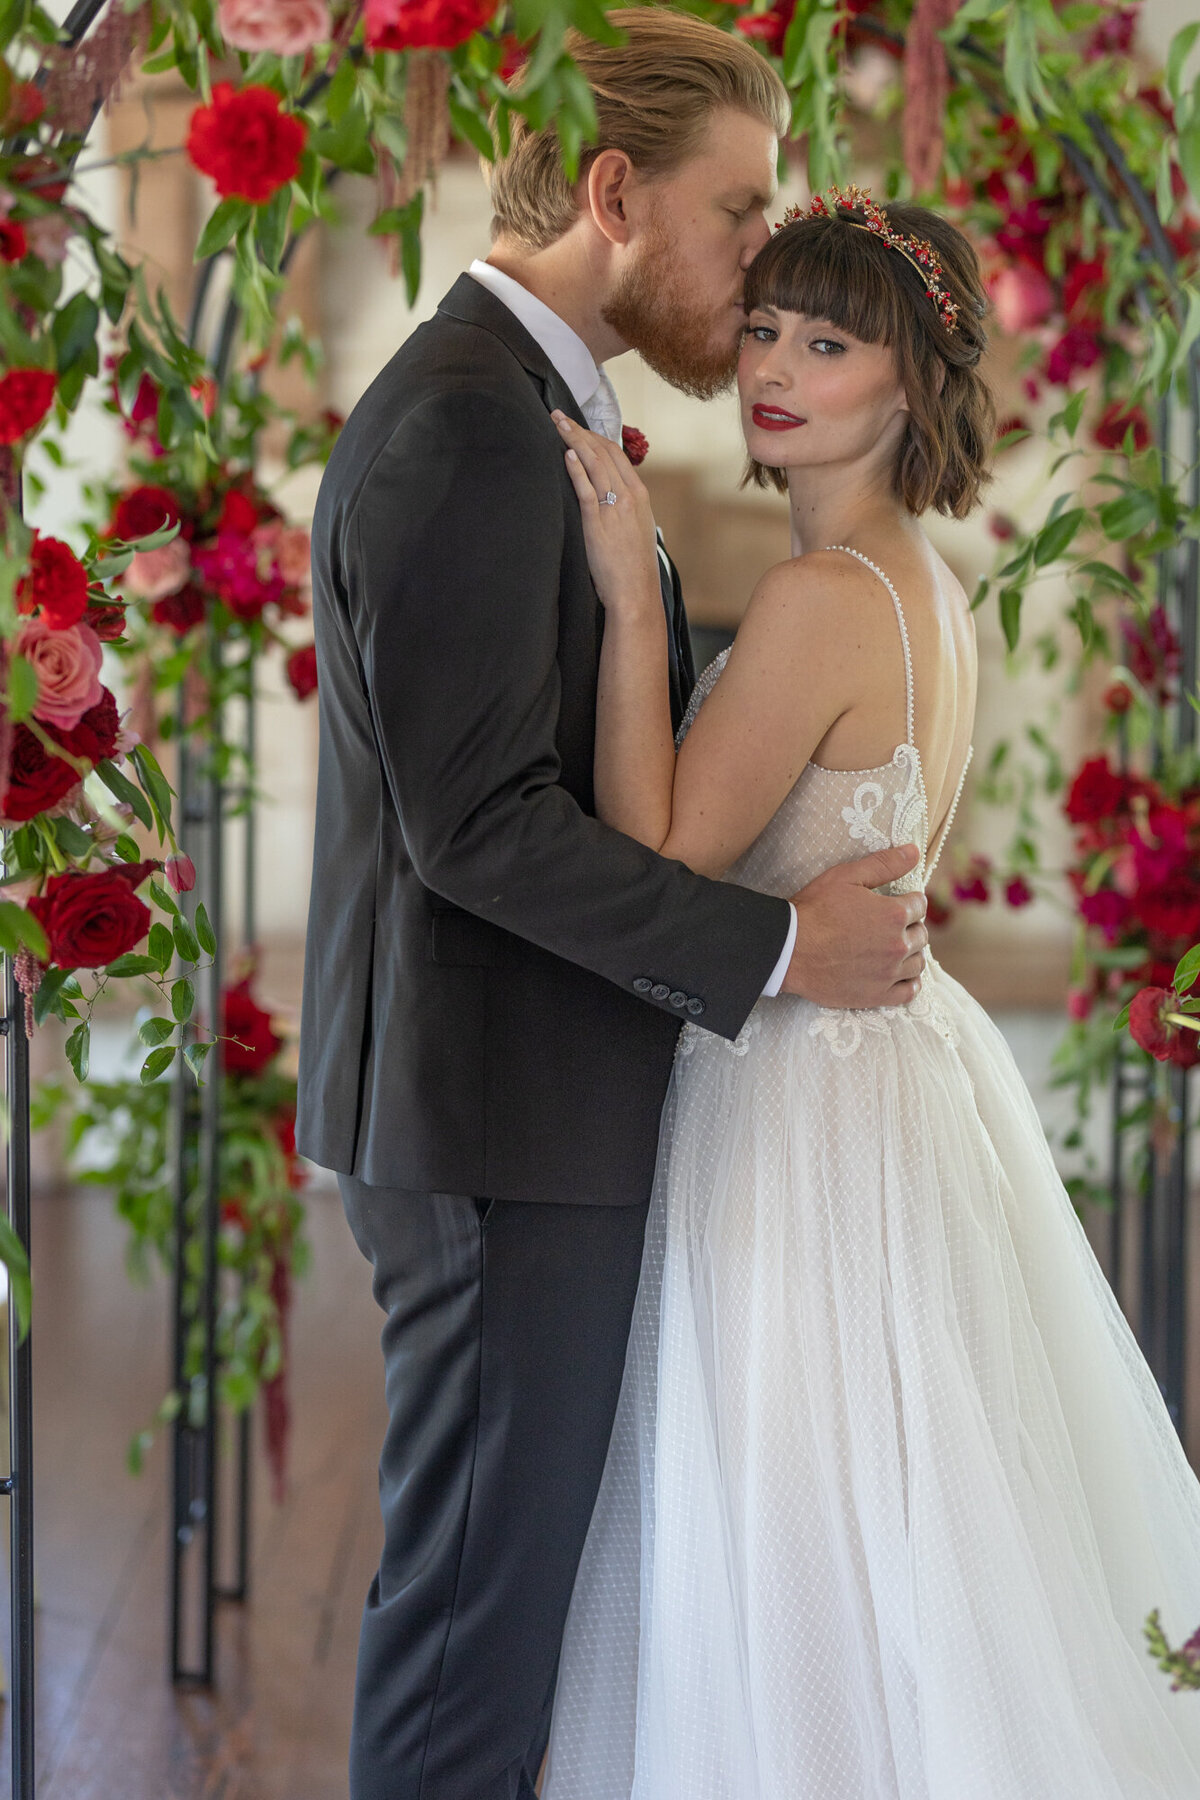 Groom kisses side of bride's head under archway of red flowers